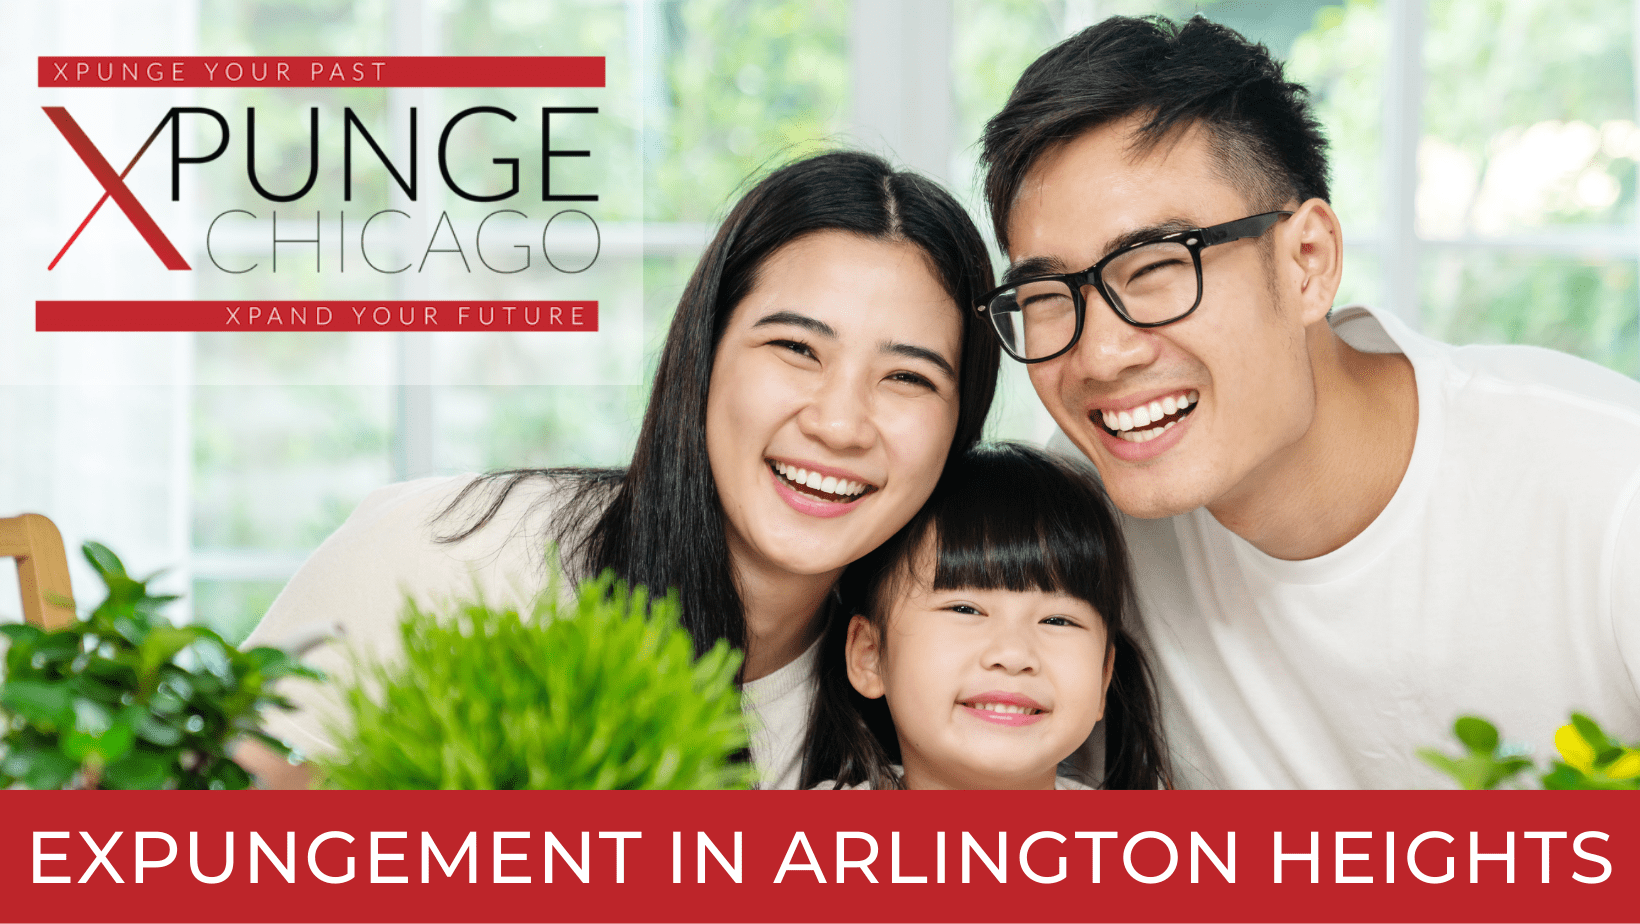 Expungement in Arlington Heights - Expungement Attorney Matthew M. Fakhoury